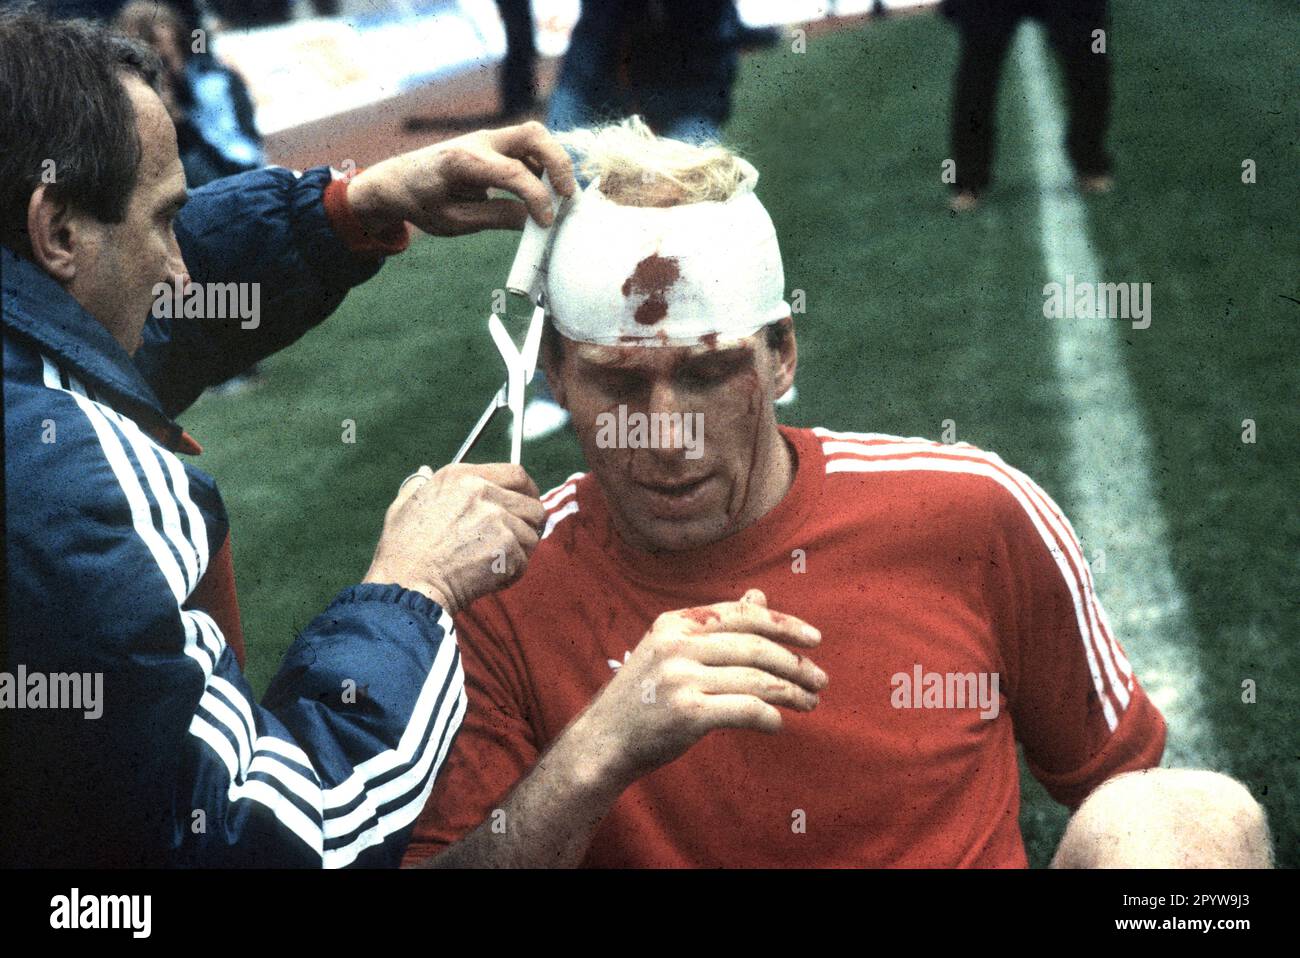 DFB Cup final FC Bayern Muenchen - 1. FC Nuernberg 4:2 /01.05.1982/ Dieter Hoeneß (FCB) injured head gets head bandage applied [automated translation] Stock Photo